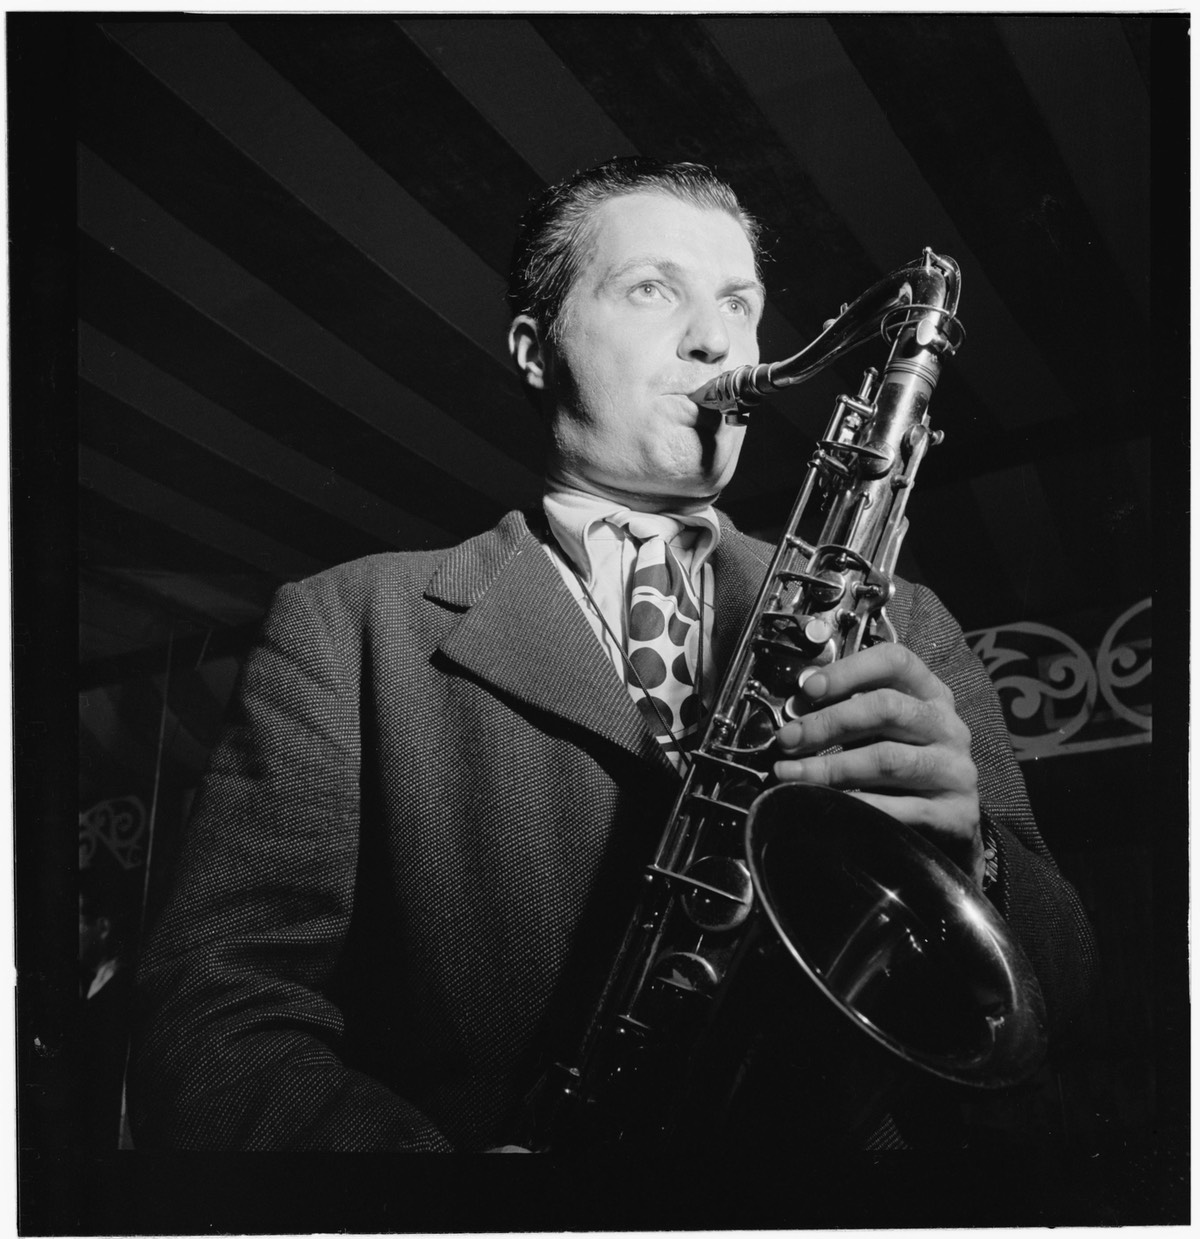 Photo of Charlie Barnet with saxophone